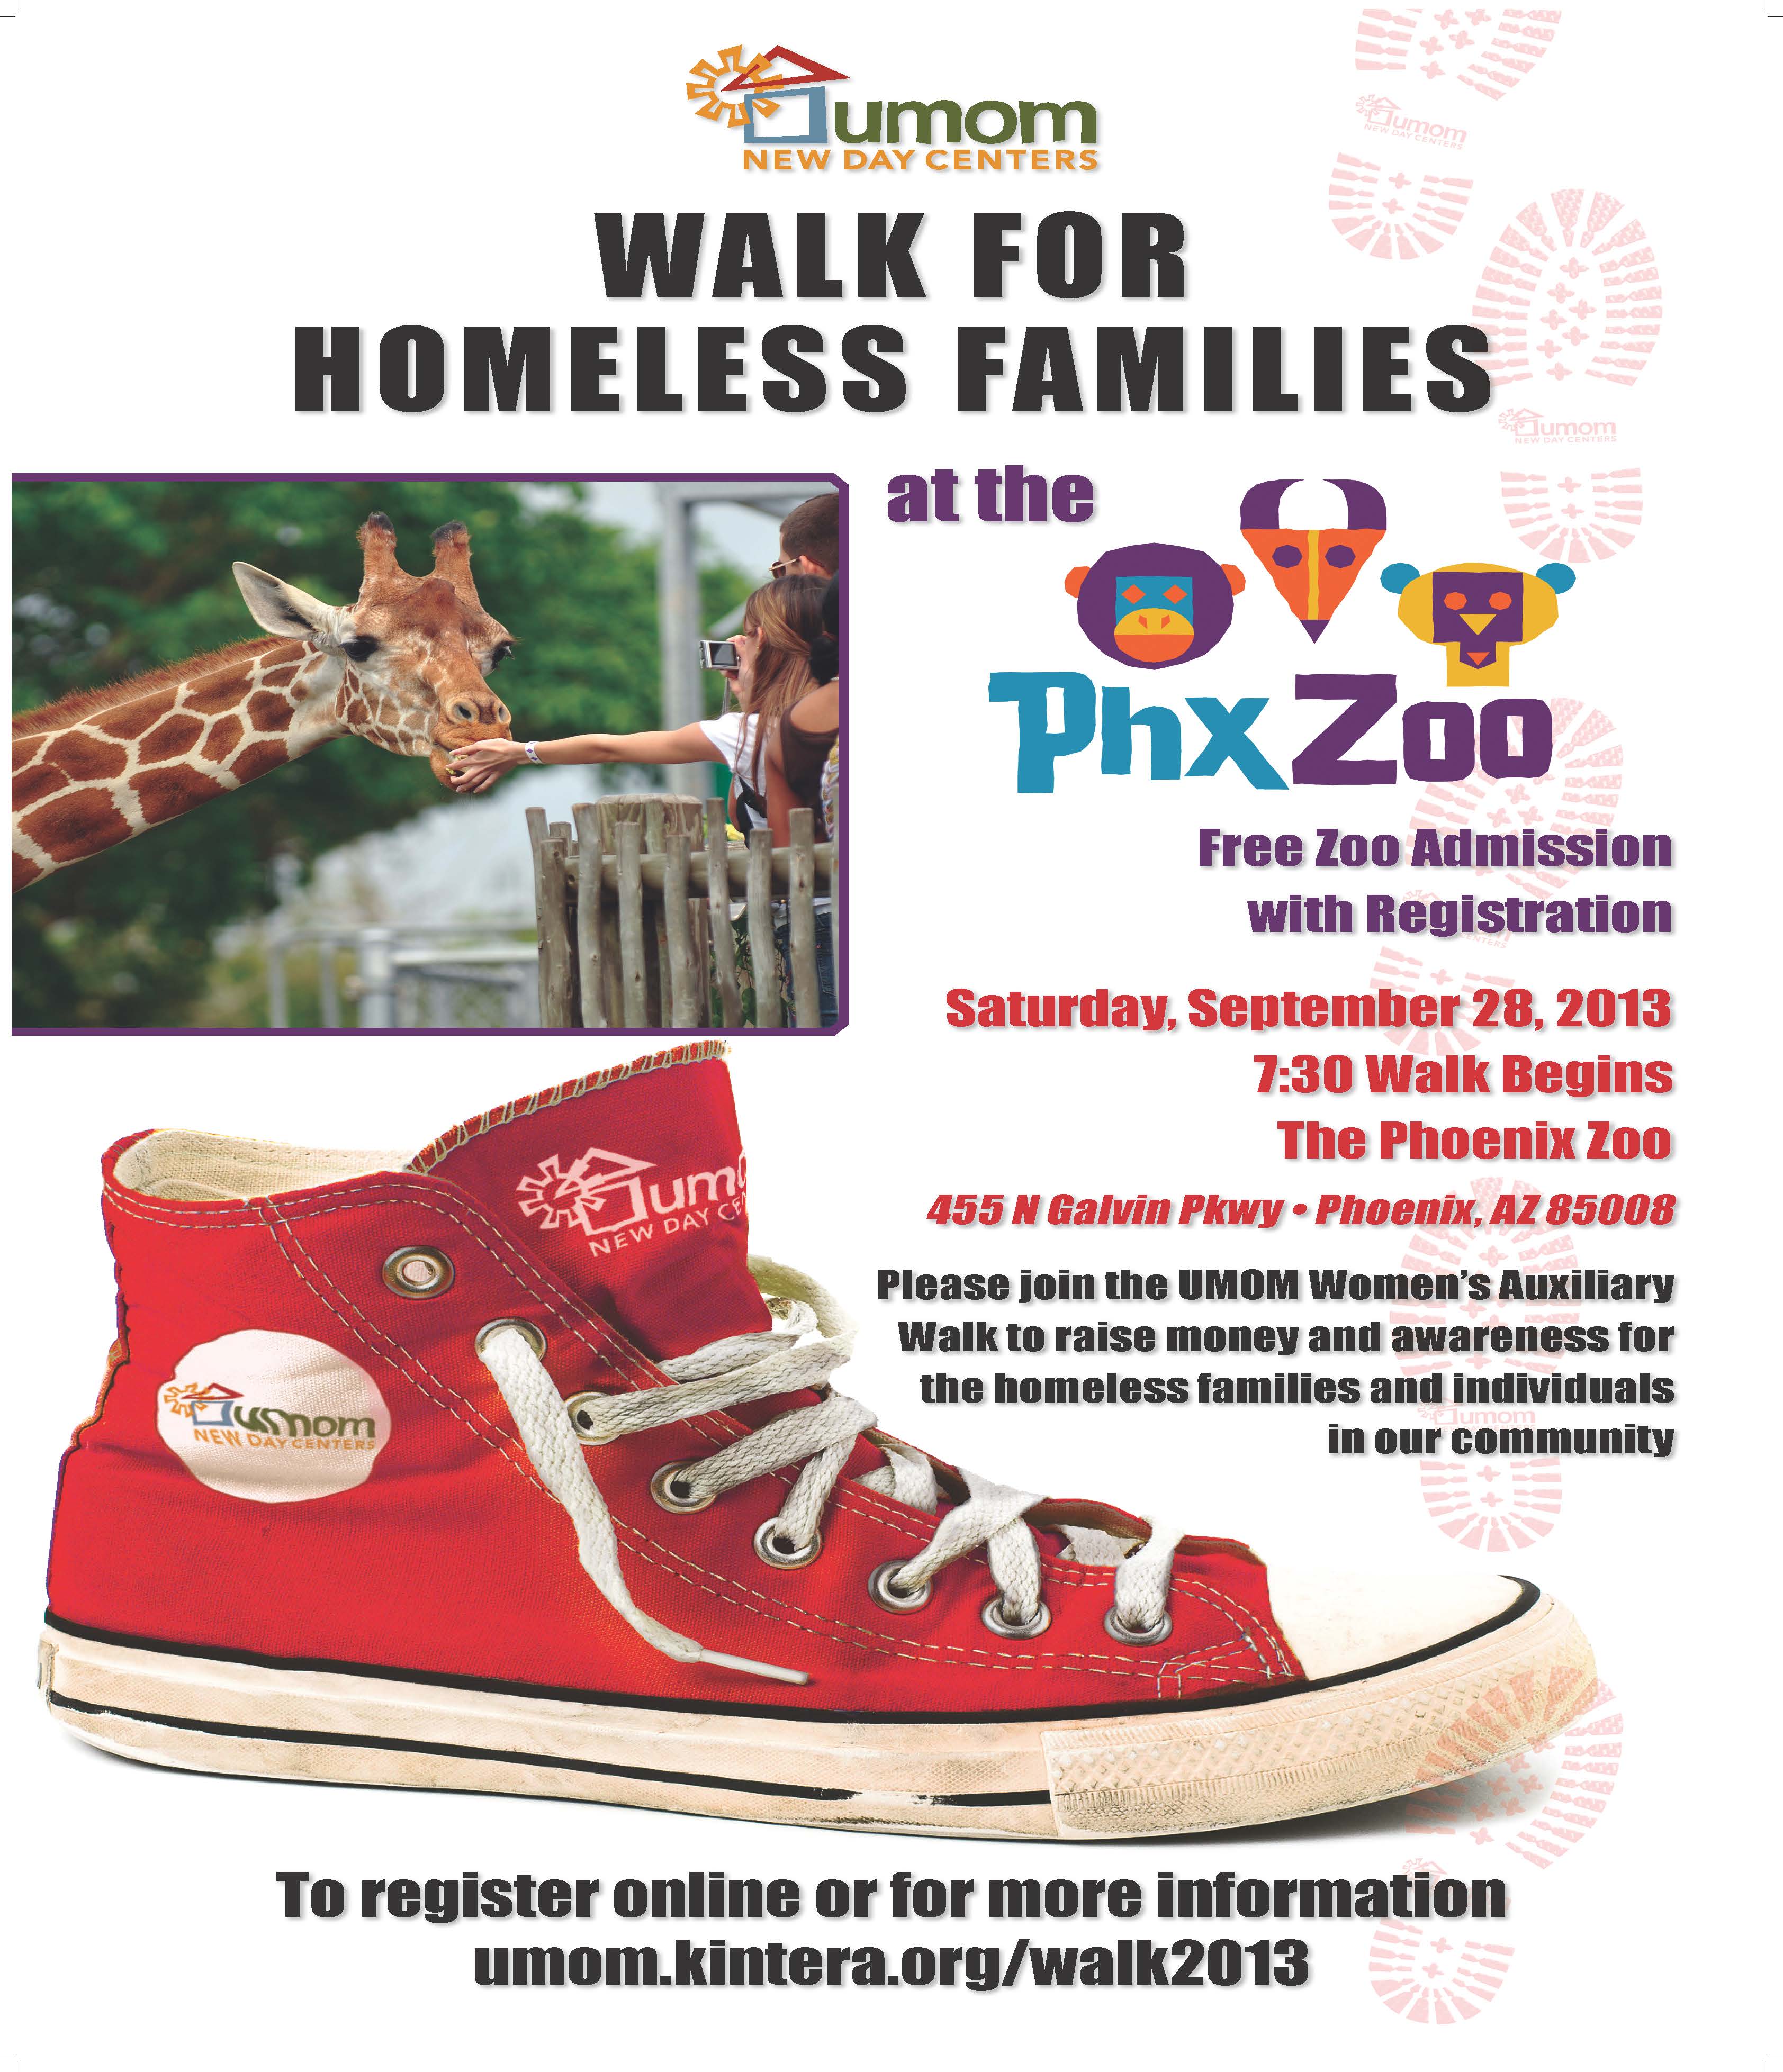 Information flyer about the Fifth Annual UMOM Walk for Homeless Families.